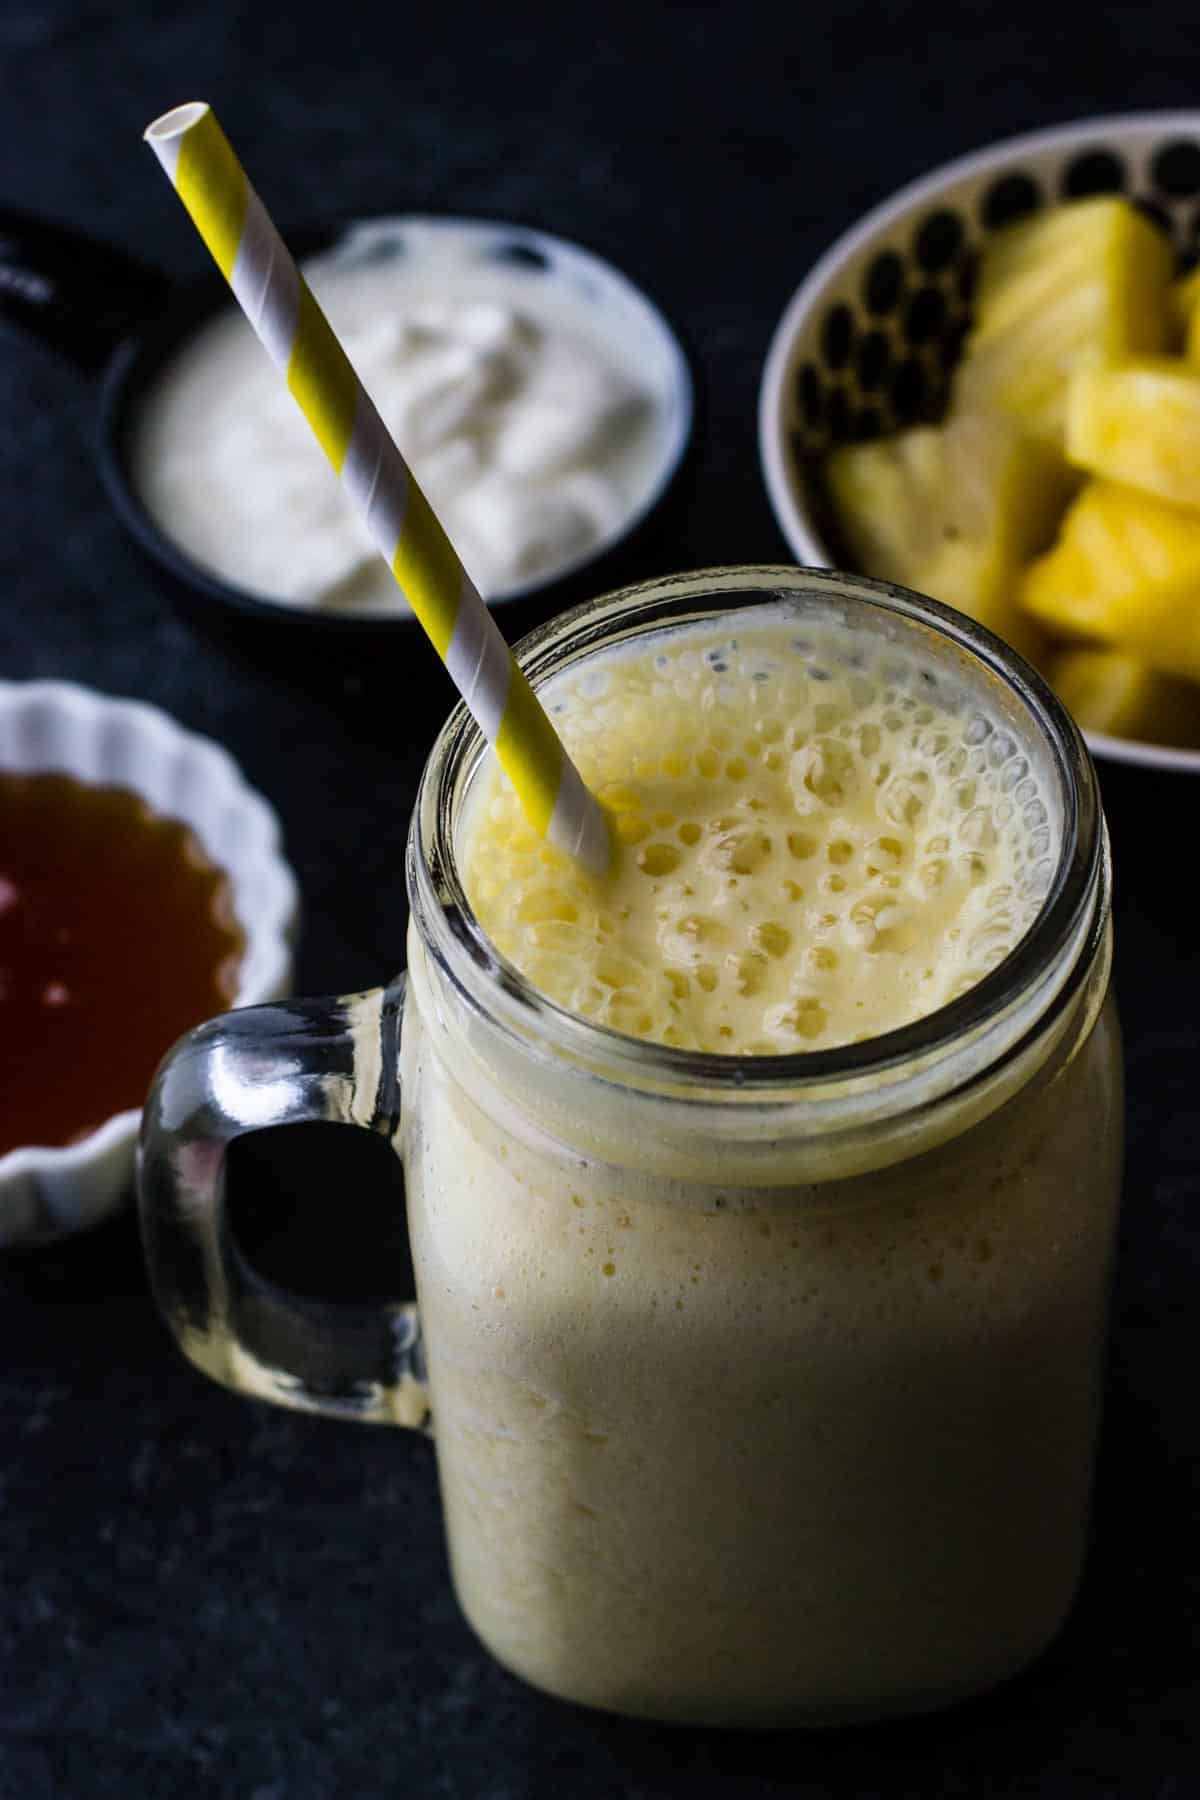 Pineapple orange mango smoothie served in a glass jar with a yellow straw. You can also see a bowl of yogurt, honey and pineapple on the side.